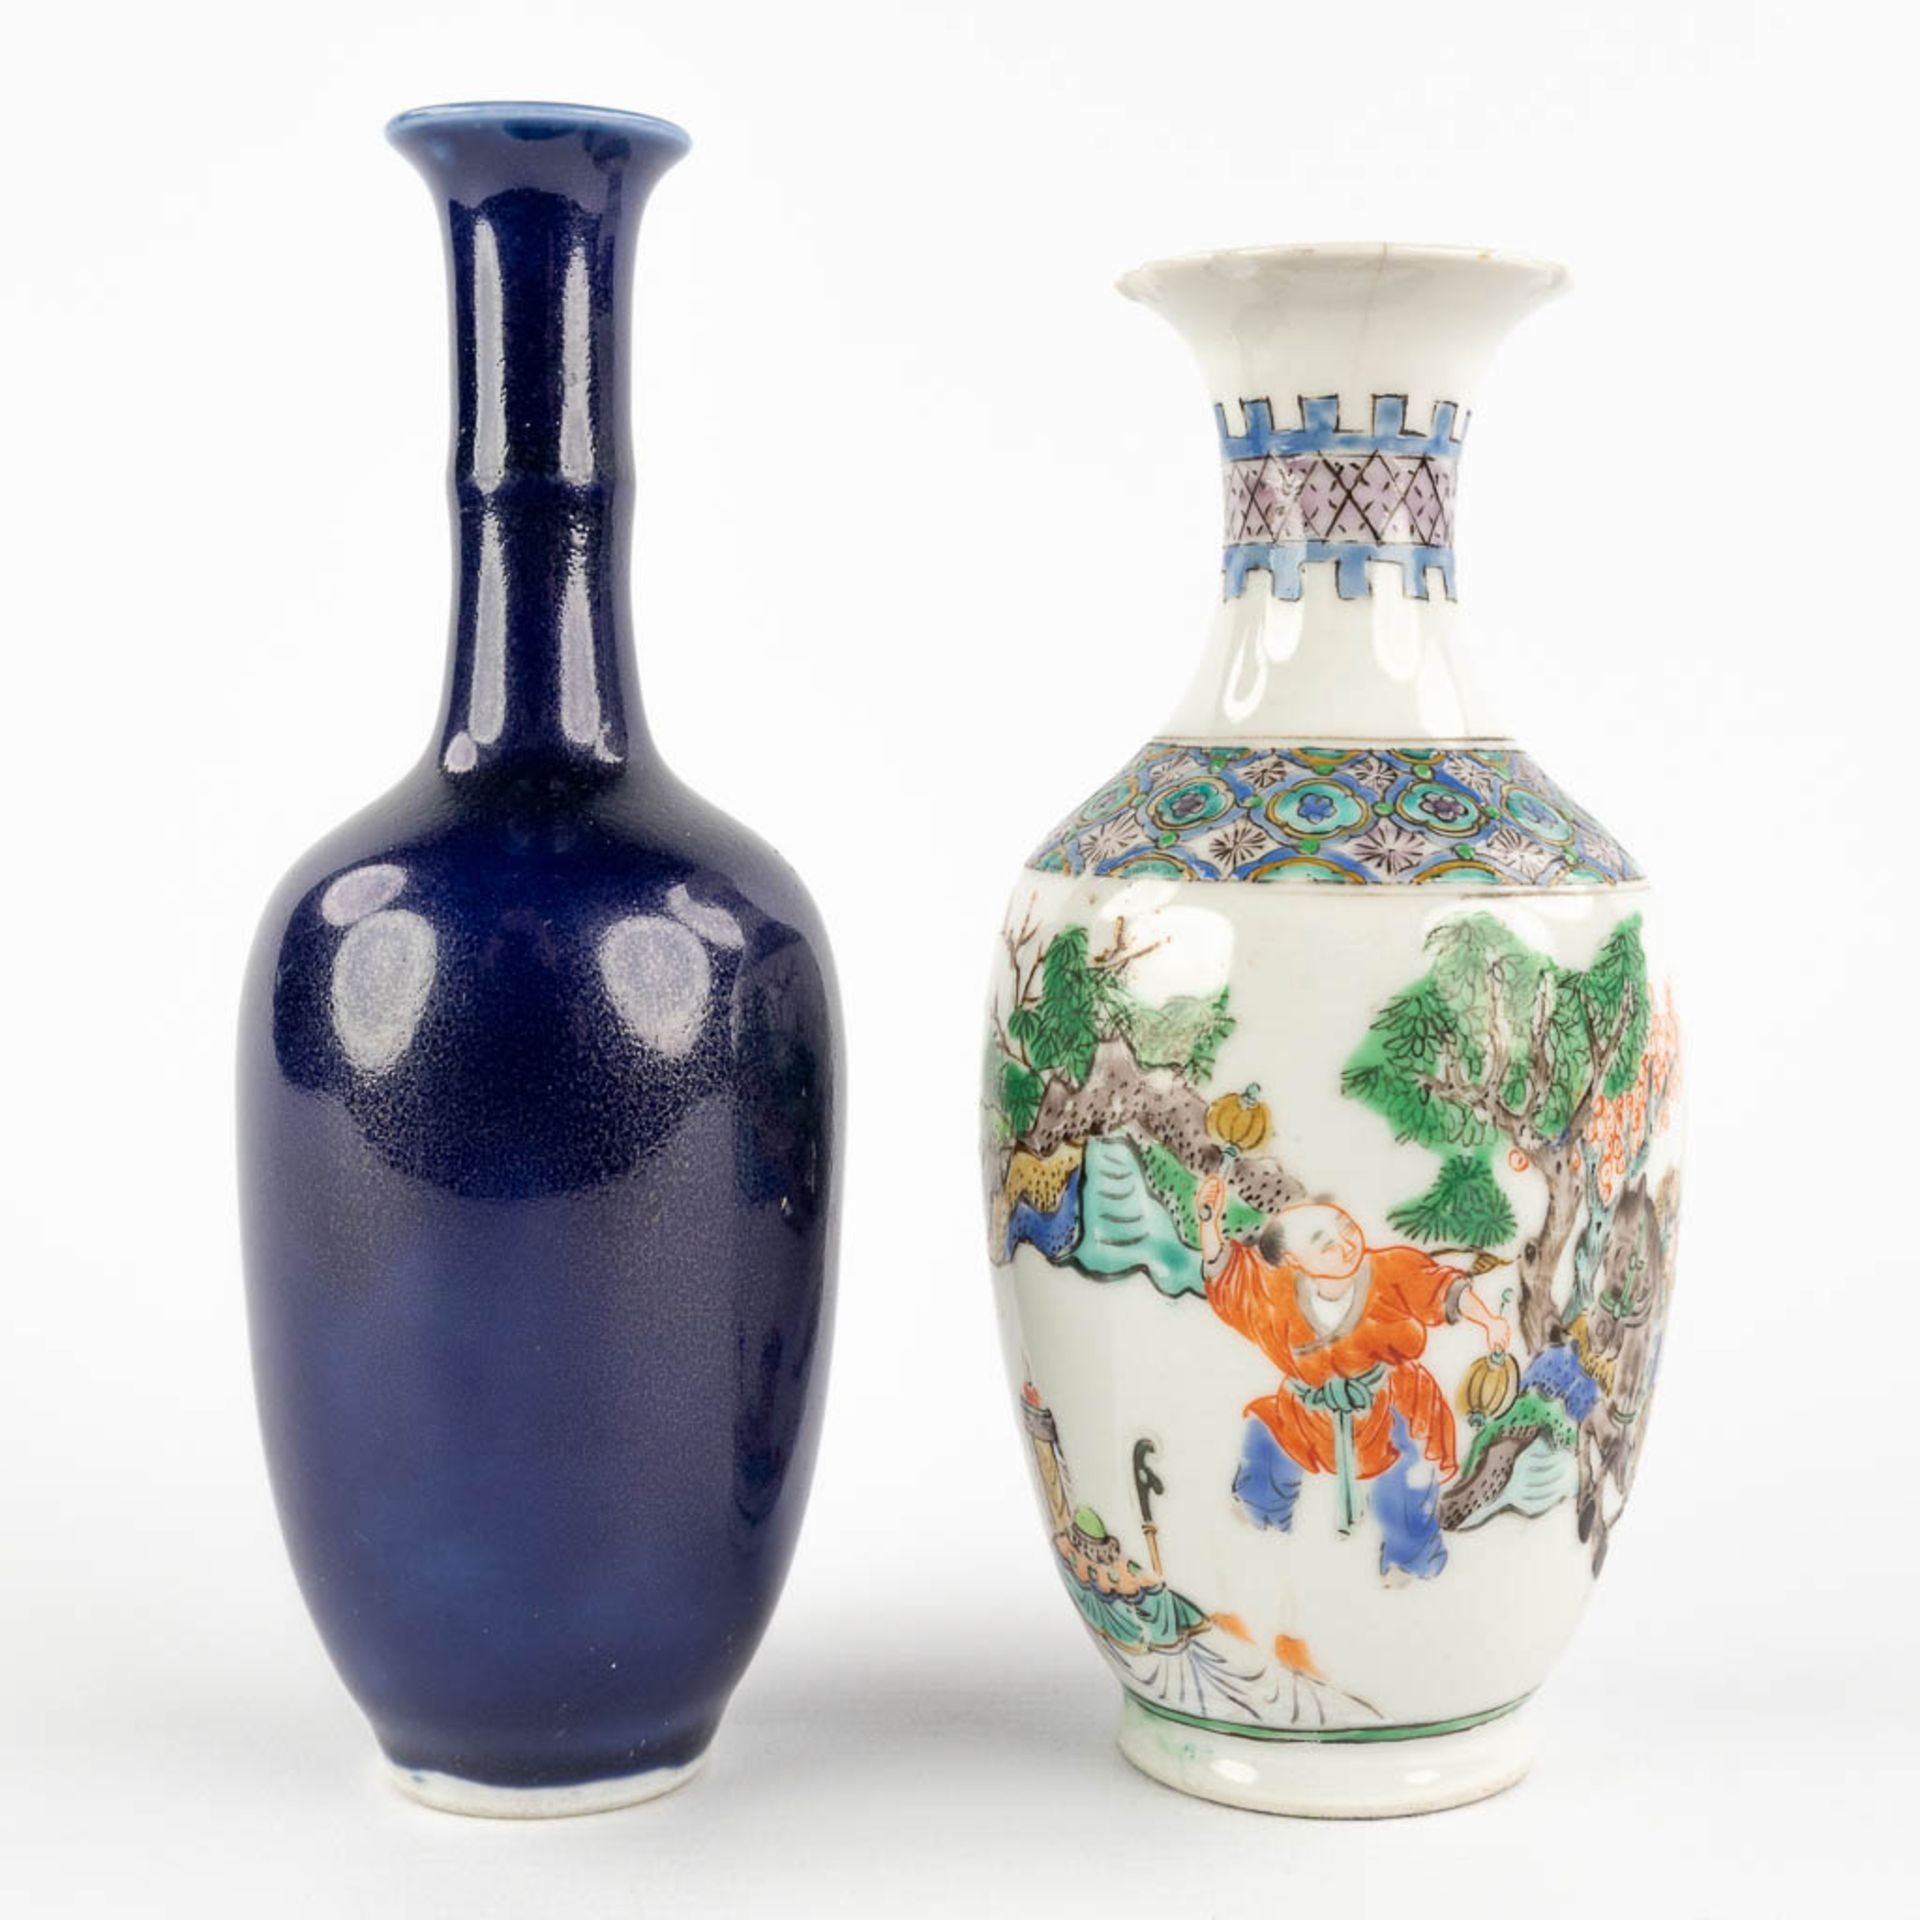 Two small Chinese vases, Famille Verte and monochrome, 19th C. (H:15 x D:7 cm) - Bild 4 aus 11